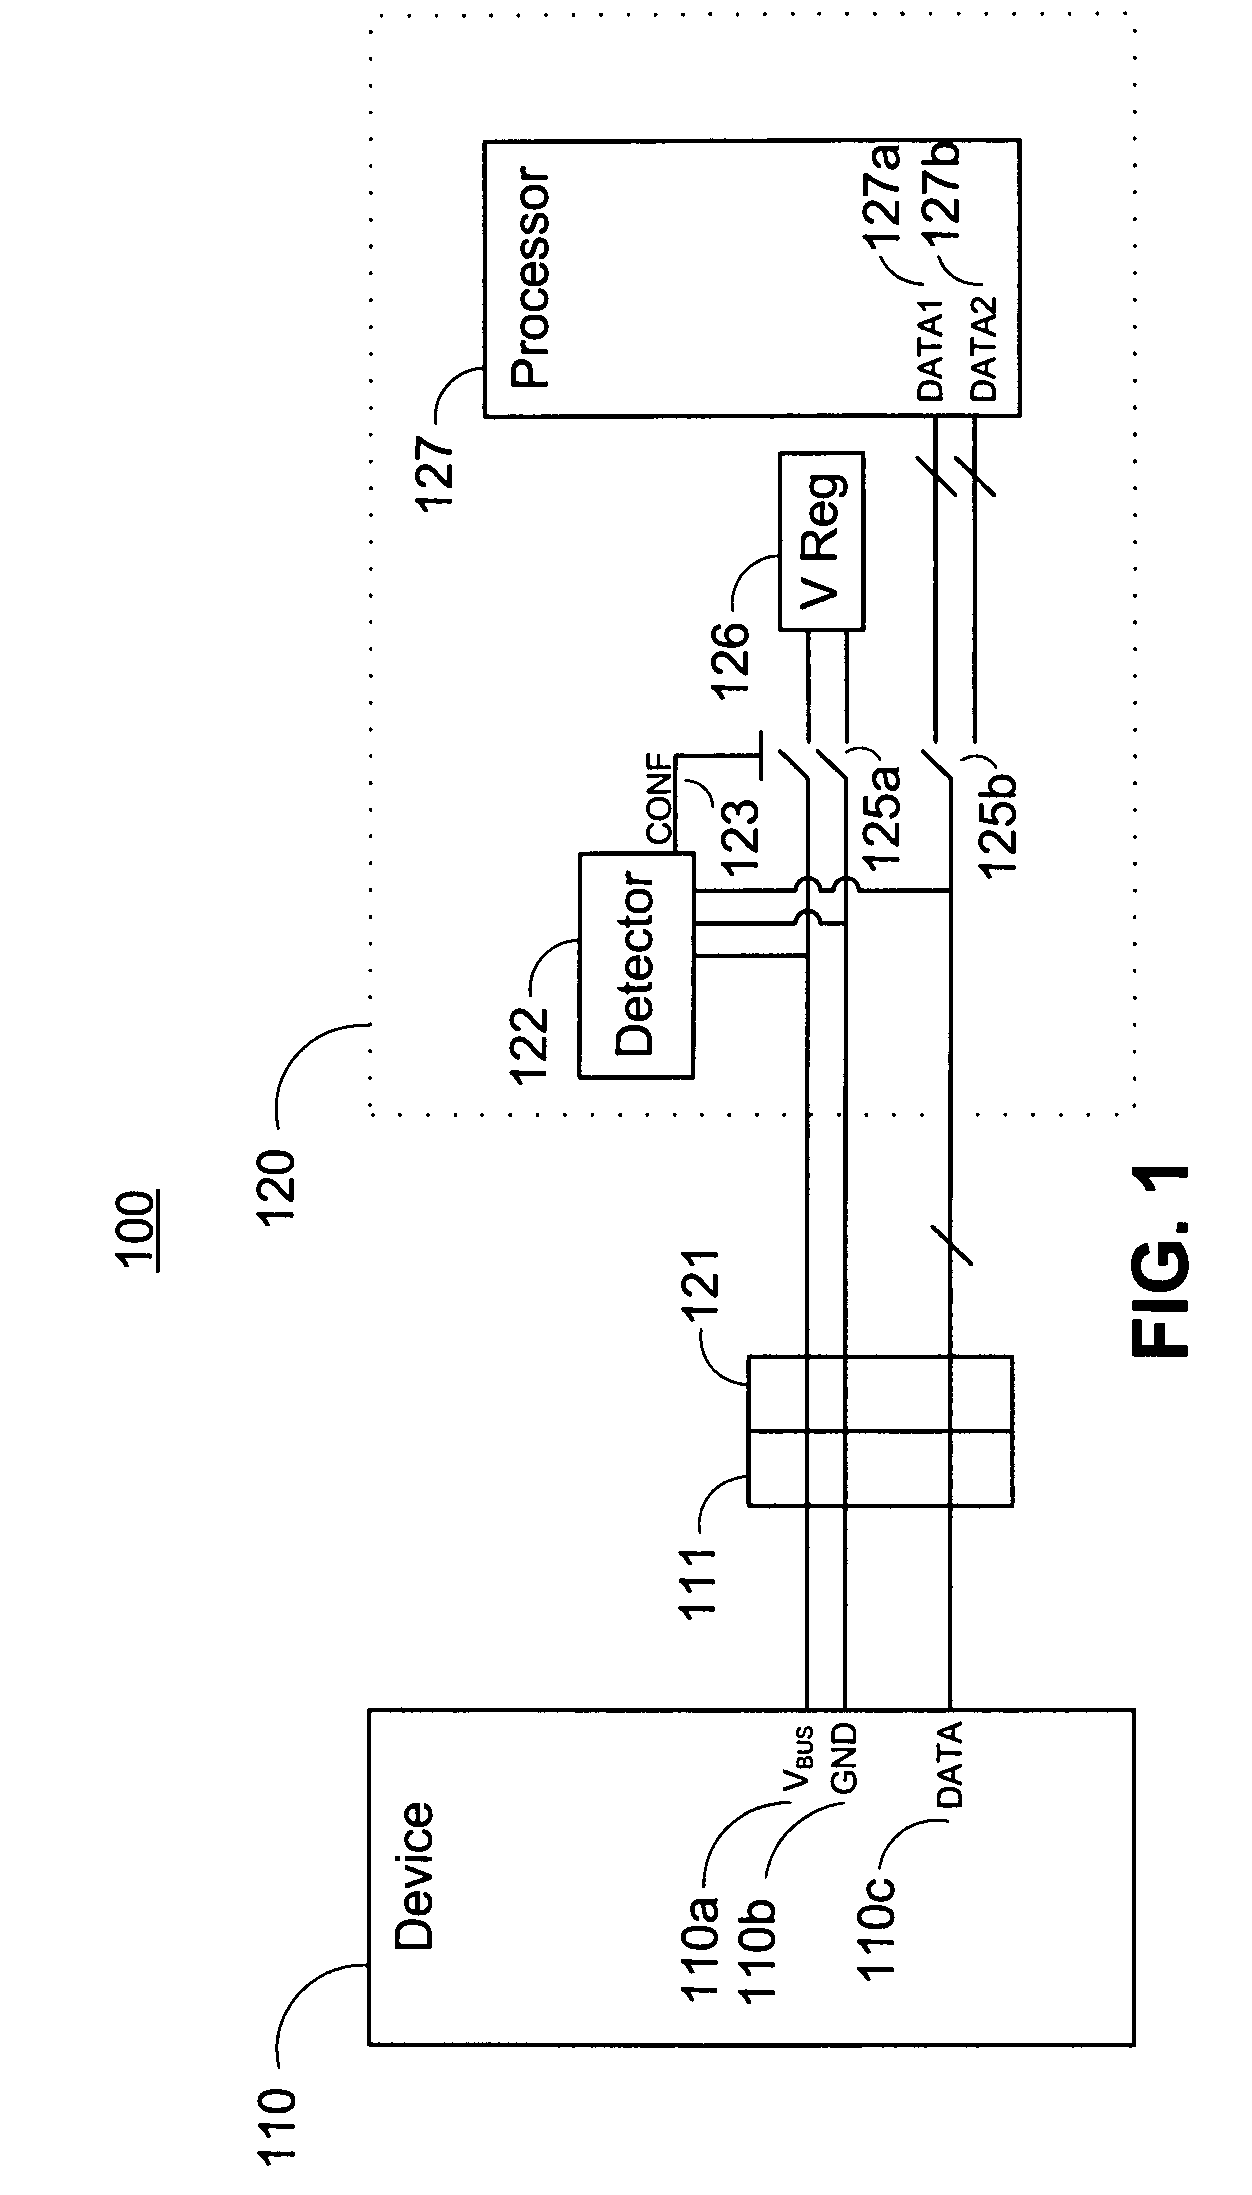 Systems and methods for determining the configuration of electronic connections